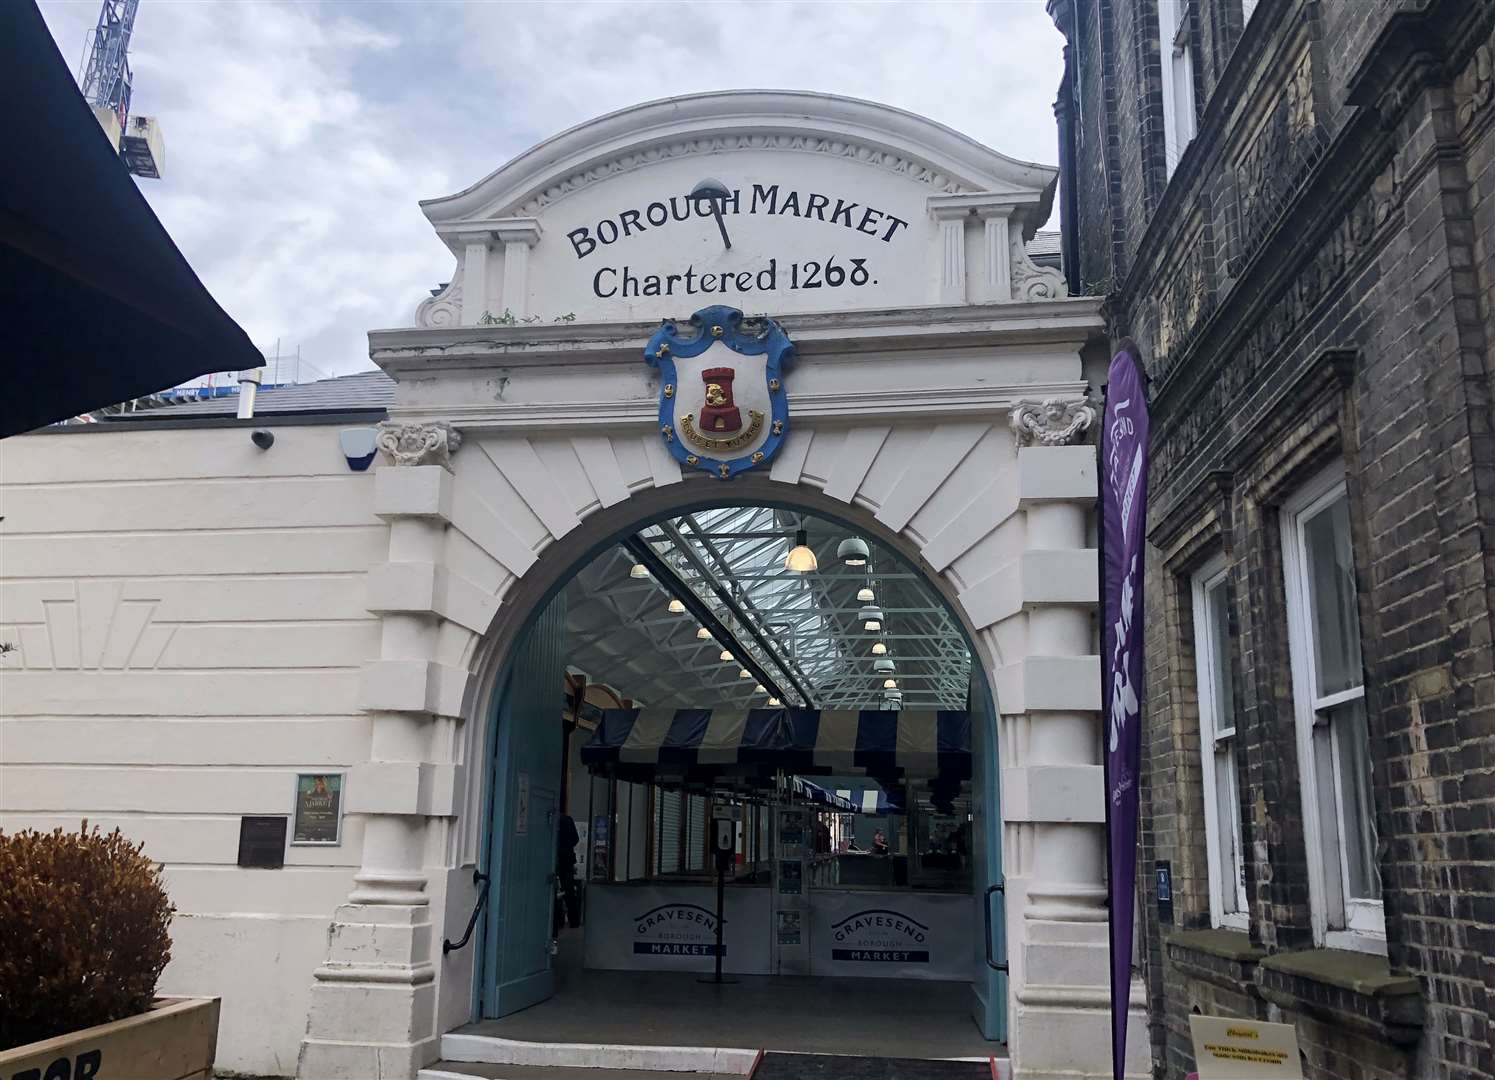 Gravesend Borough Market was refurbed by the council in 2014